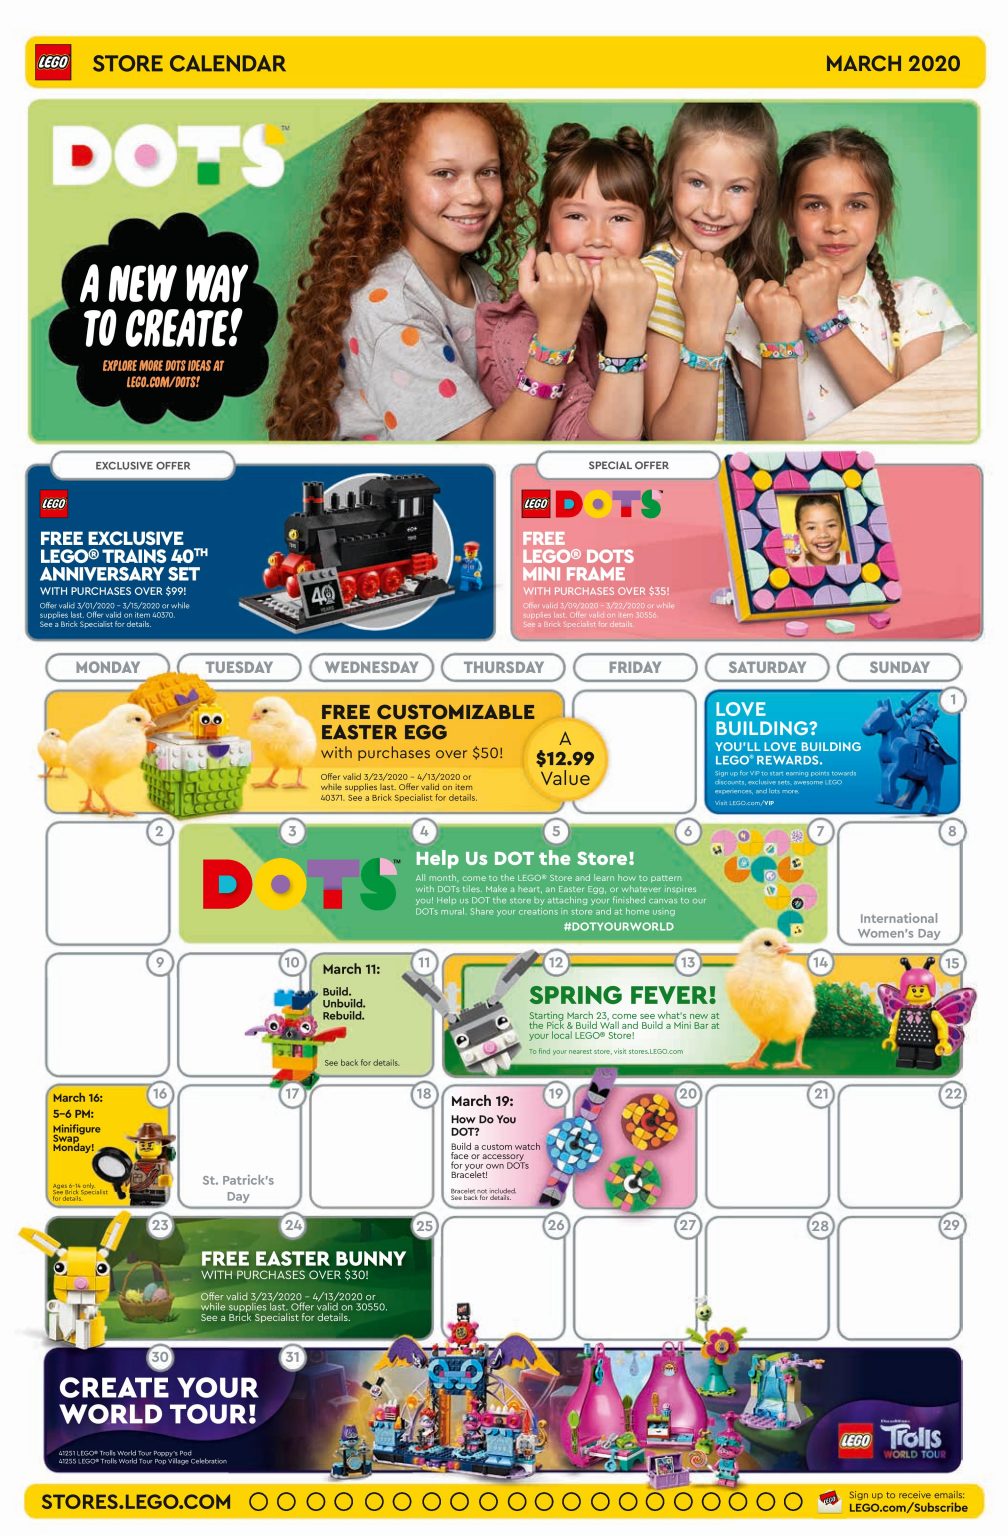 LEGO March 2020 Store Calendar Promotions & Events The Brick Fan